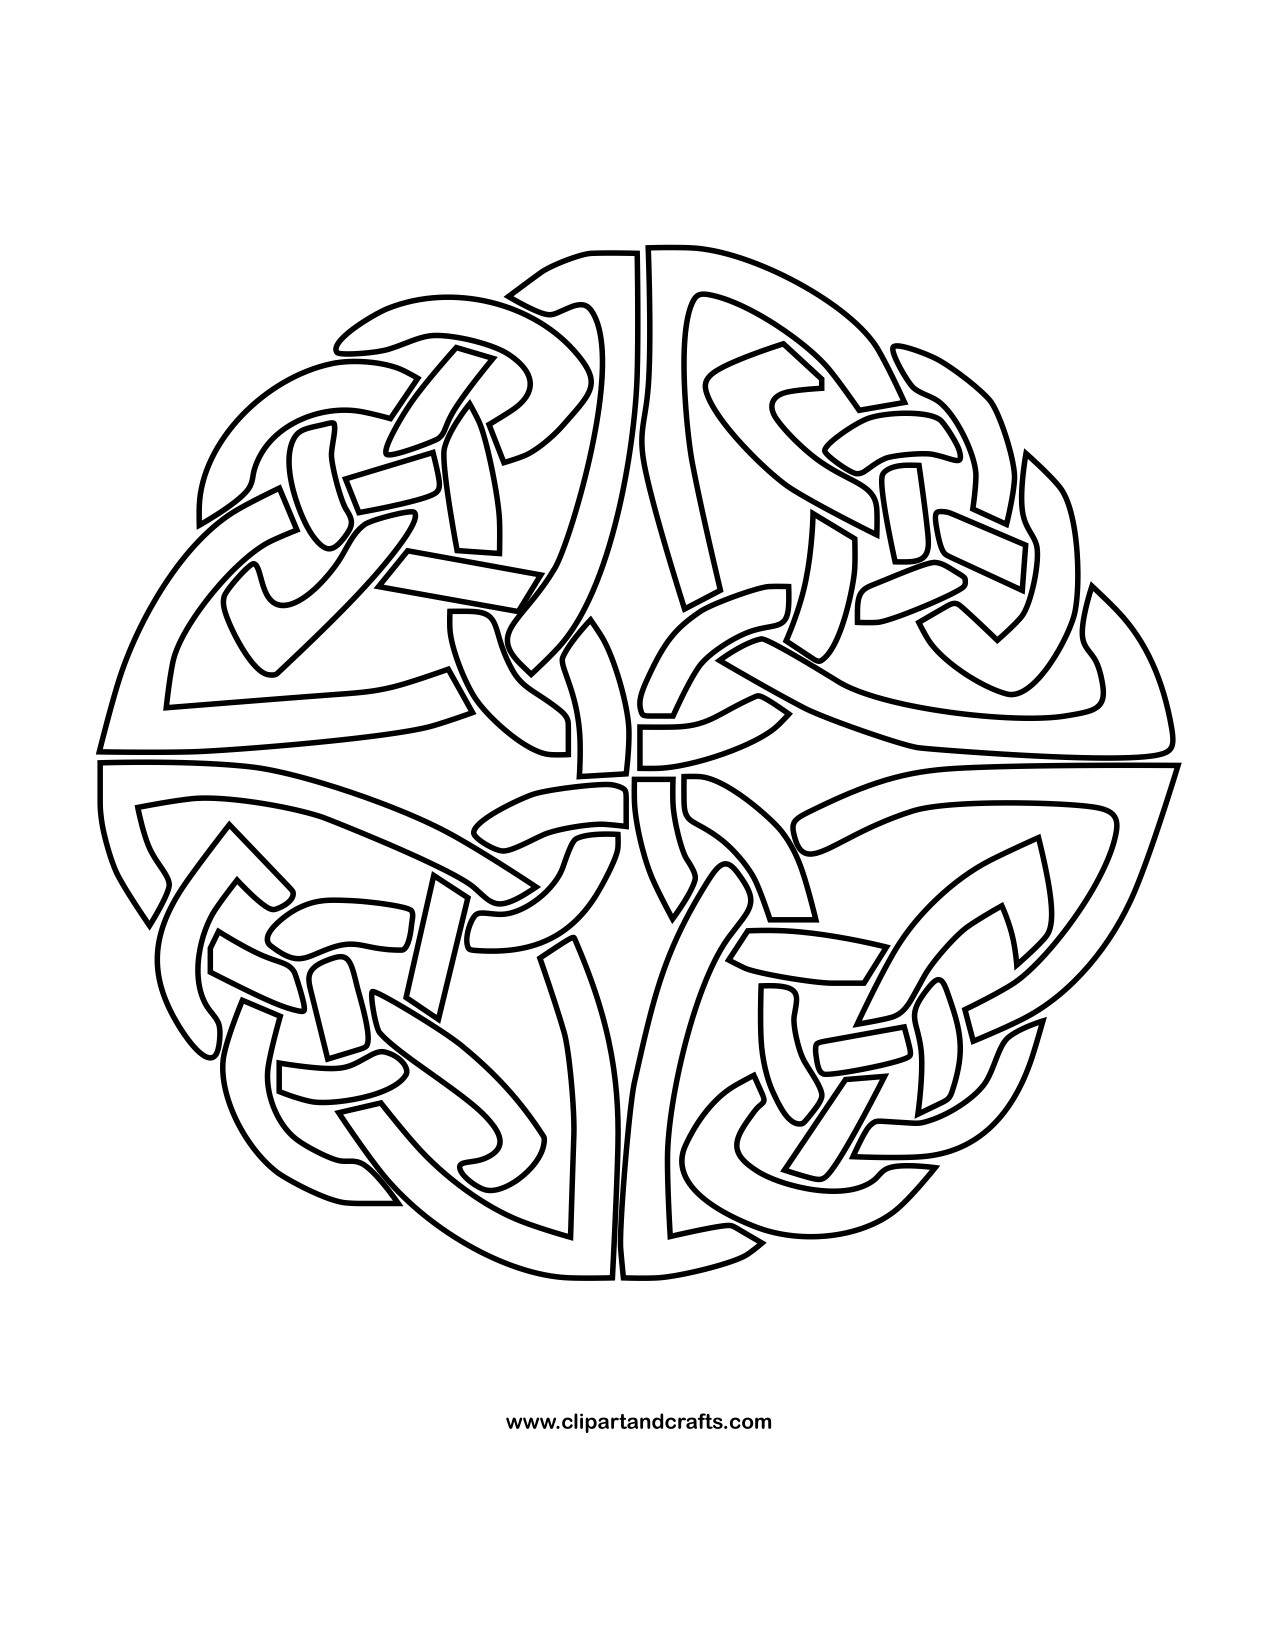 Celtic Coloring Pages For Adults
 Mandala Monday More Free Celtic Mandalas to Color